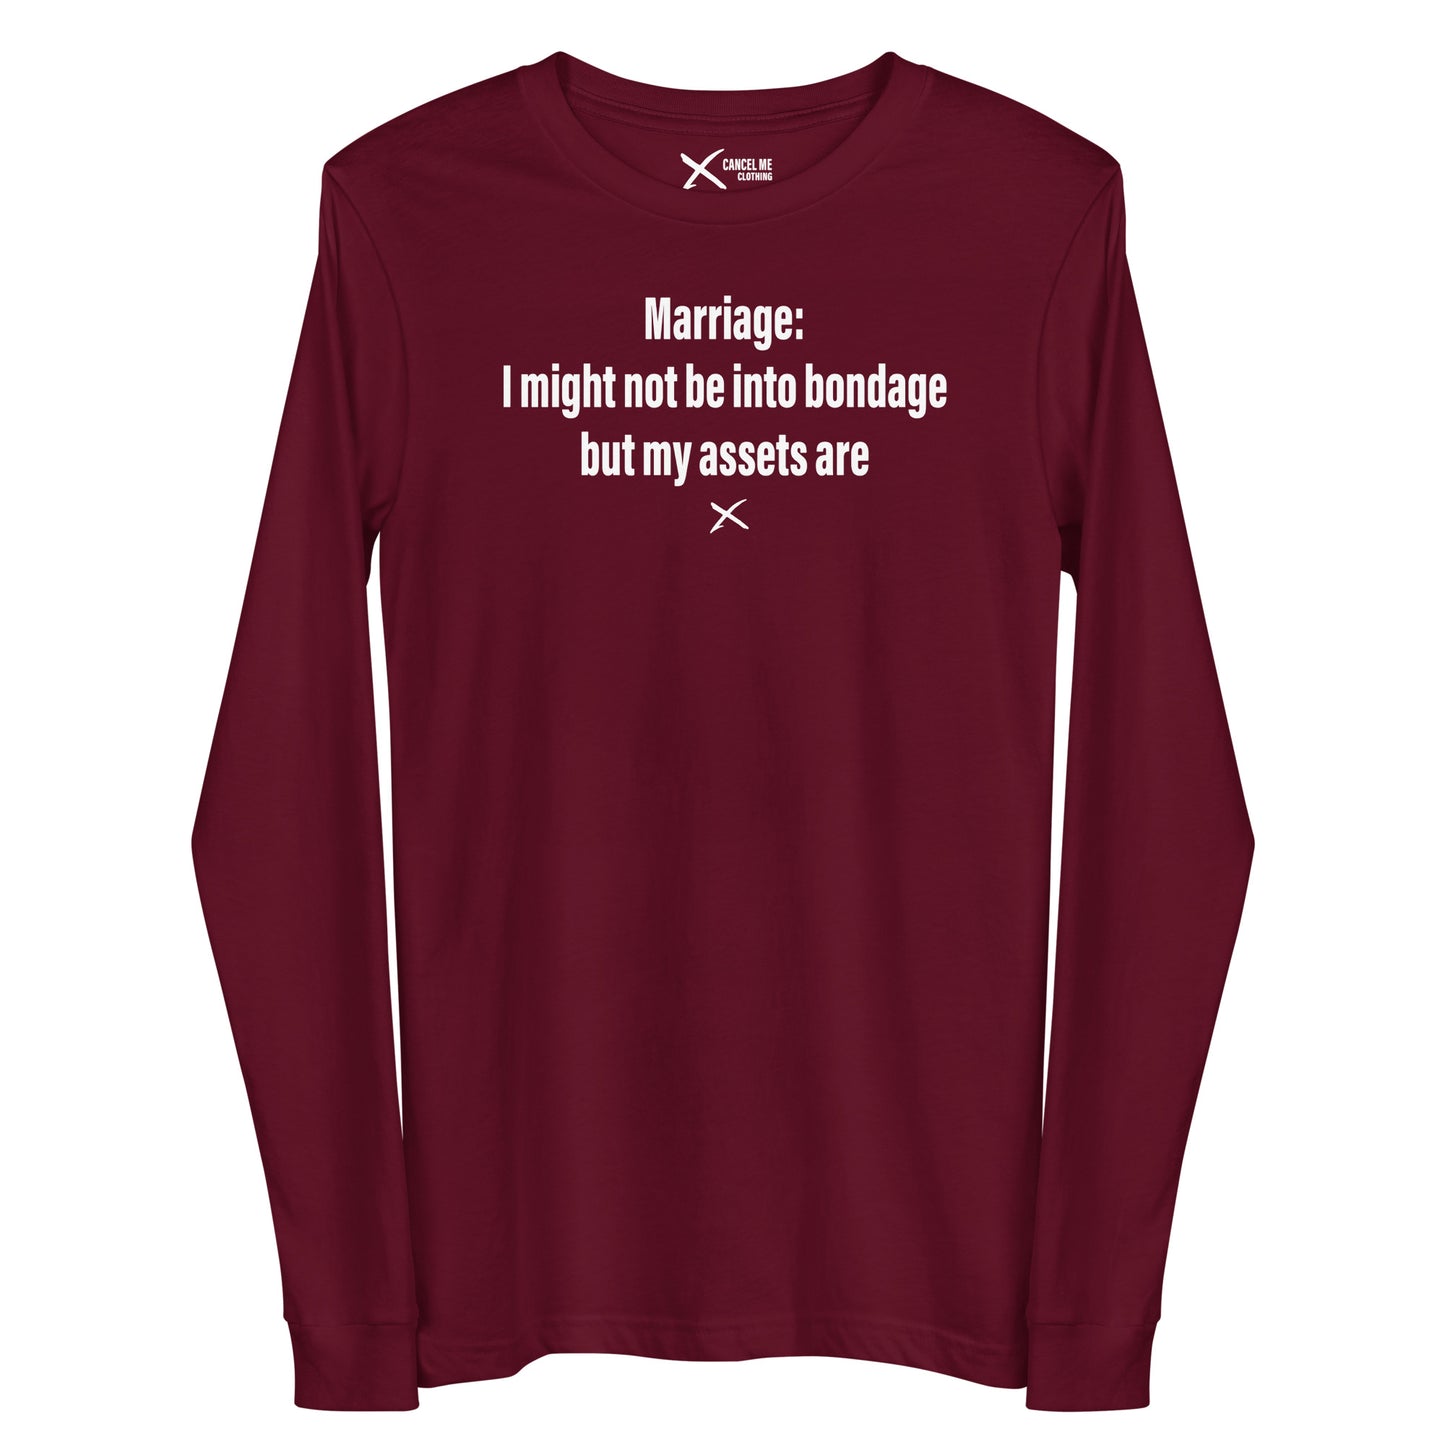 Marriage: I might not be into bondage but my assets are - Longsleeve